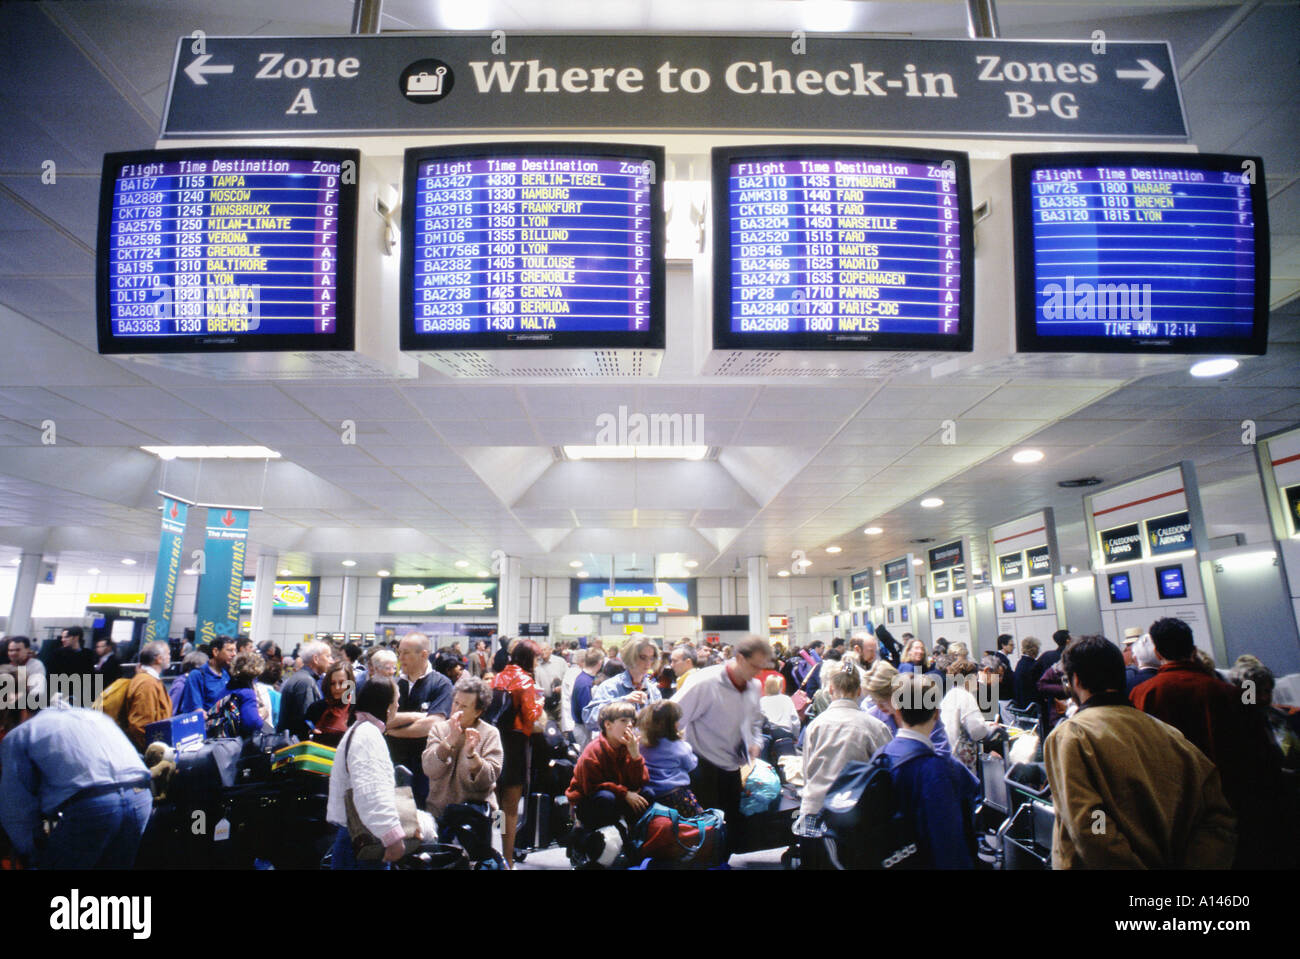 Check-in queue at Gatwick airport London UK Stock Photo - Alamy